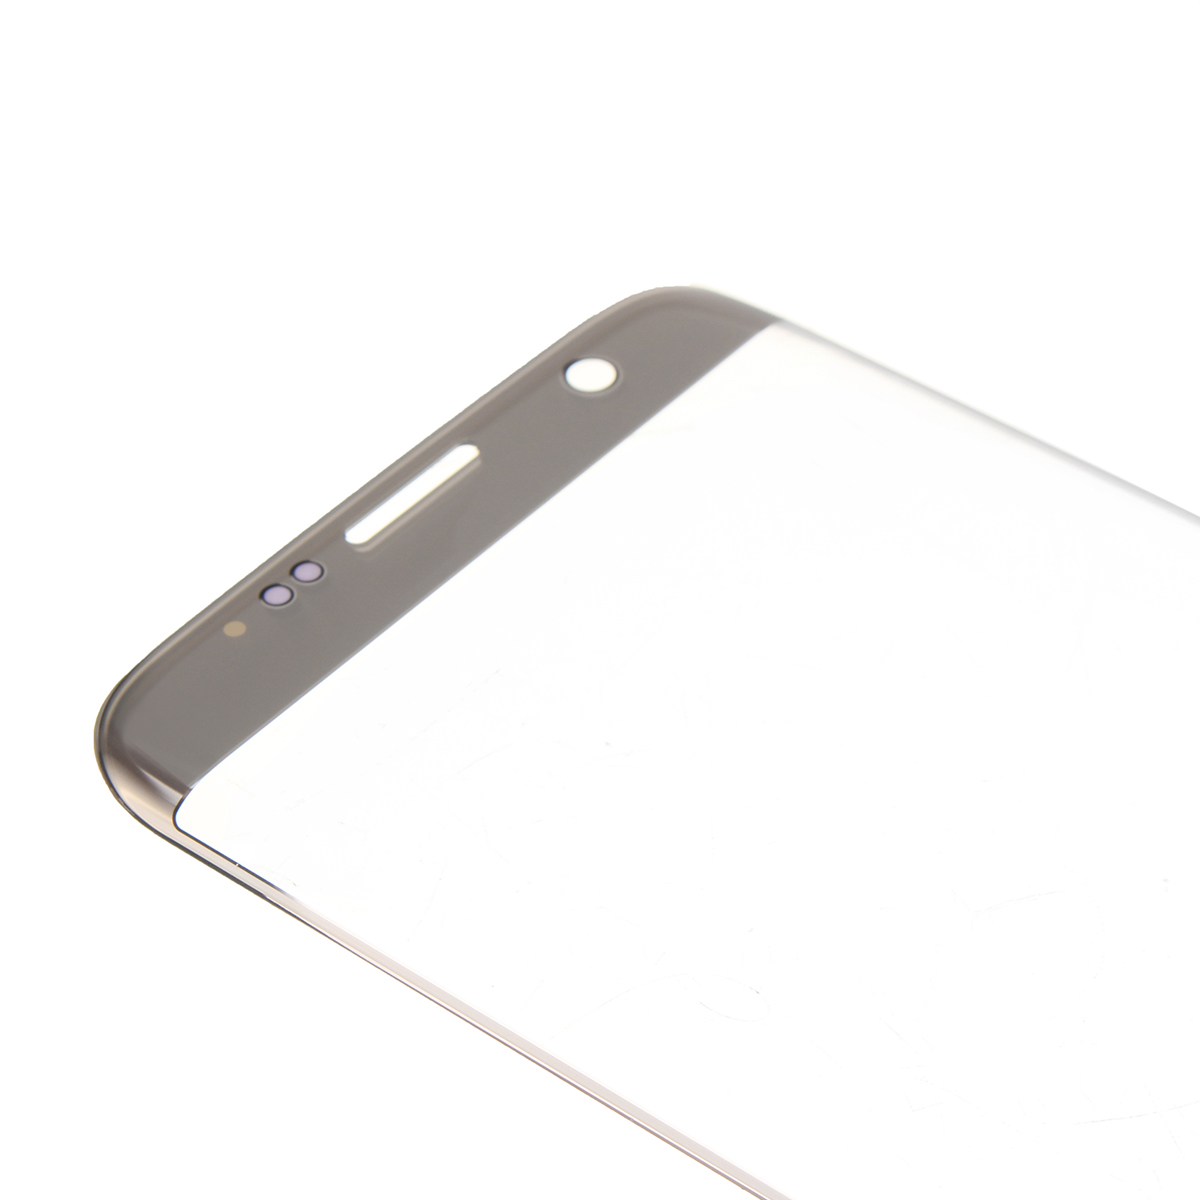 Front-Glass-Panel-Touch-Screen-Replacement--Tools-for-Samsung-Galaxy-S7-Edge-1330036